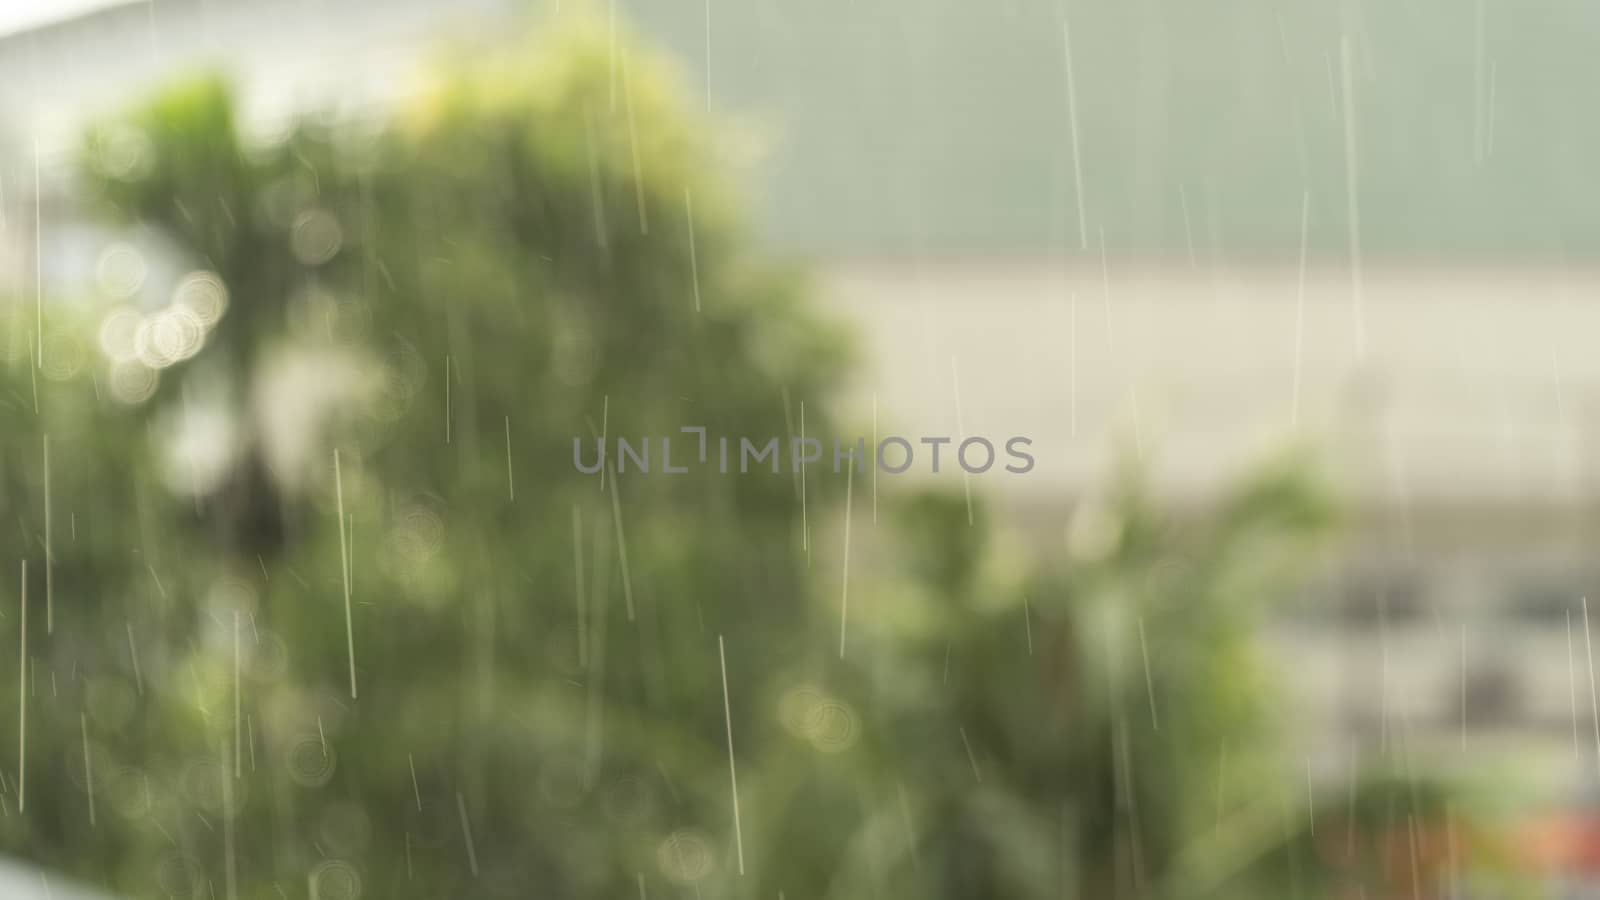 Blurred photo of a light rain or drizzle with trees in the background by sonandonures